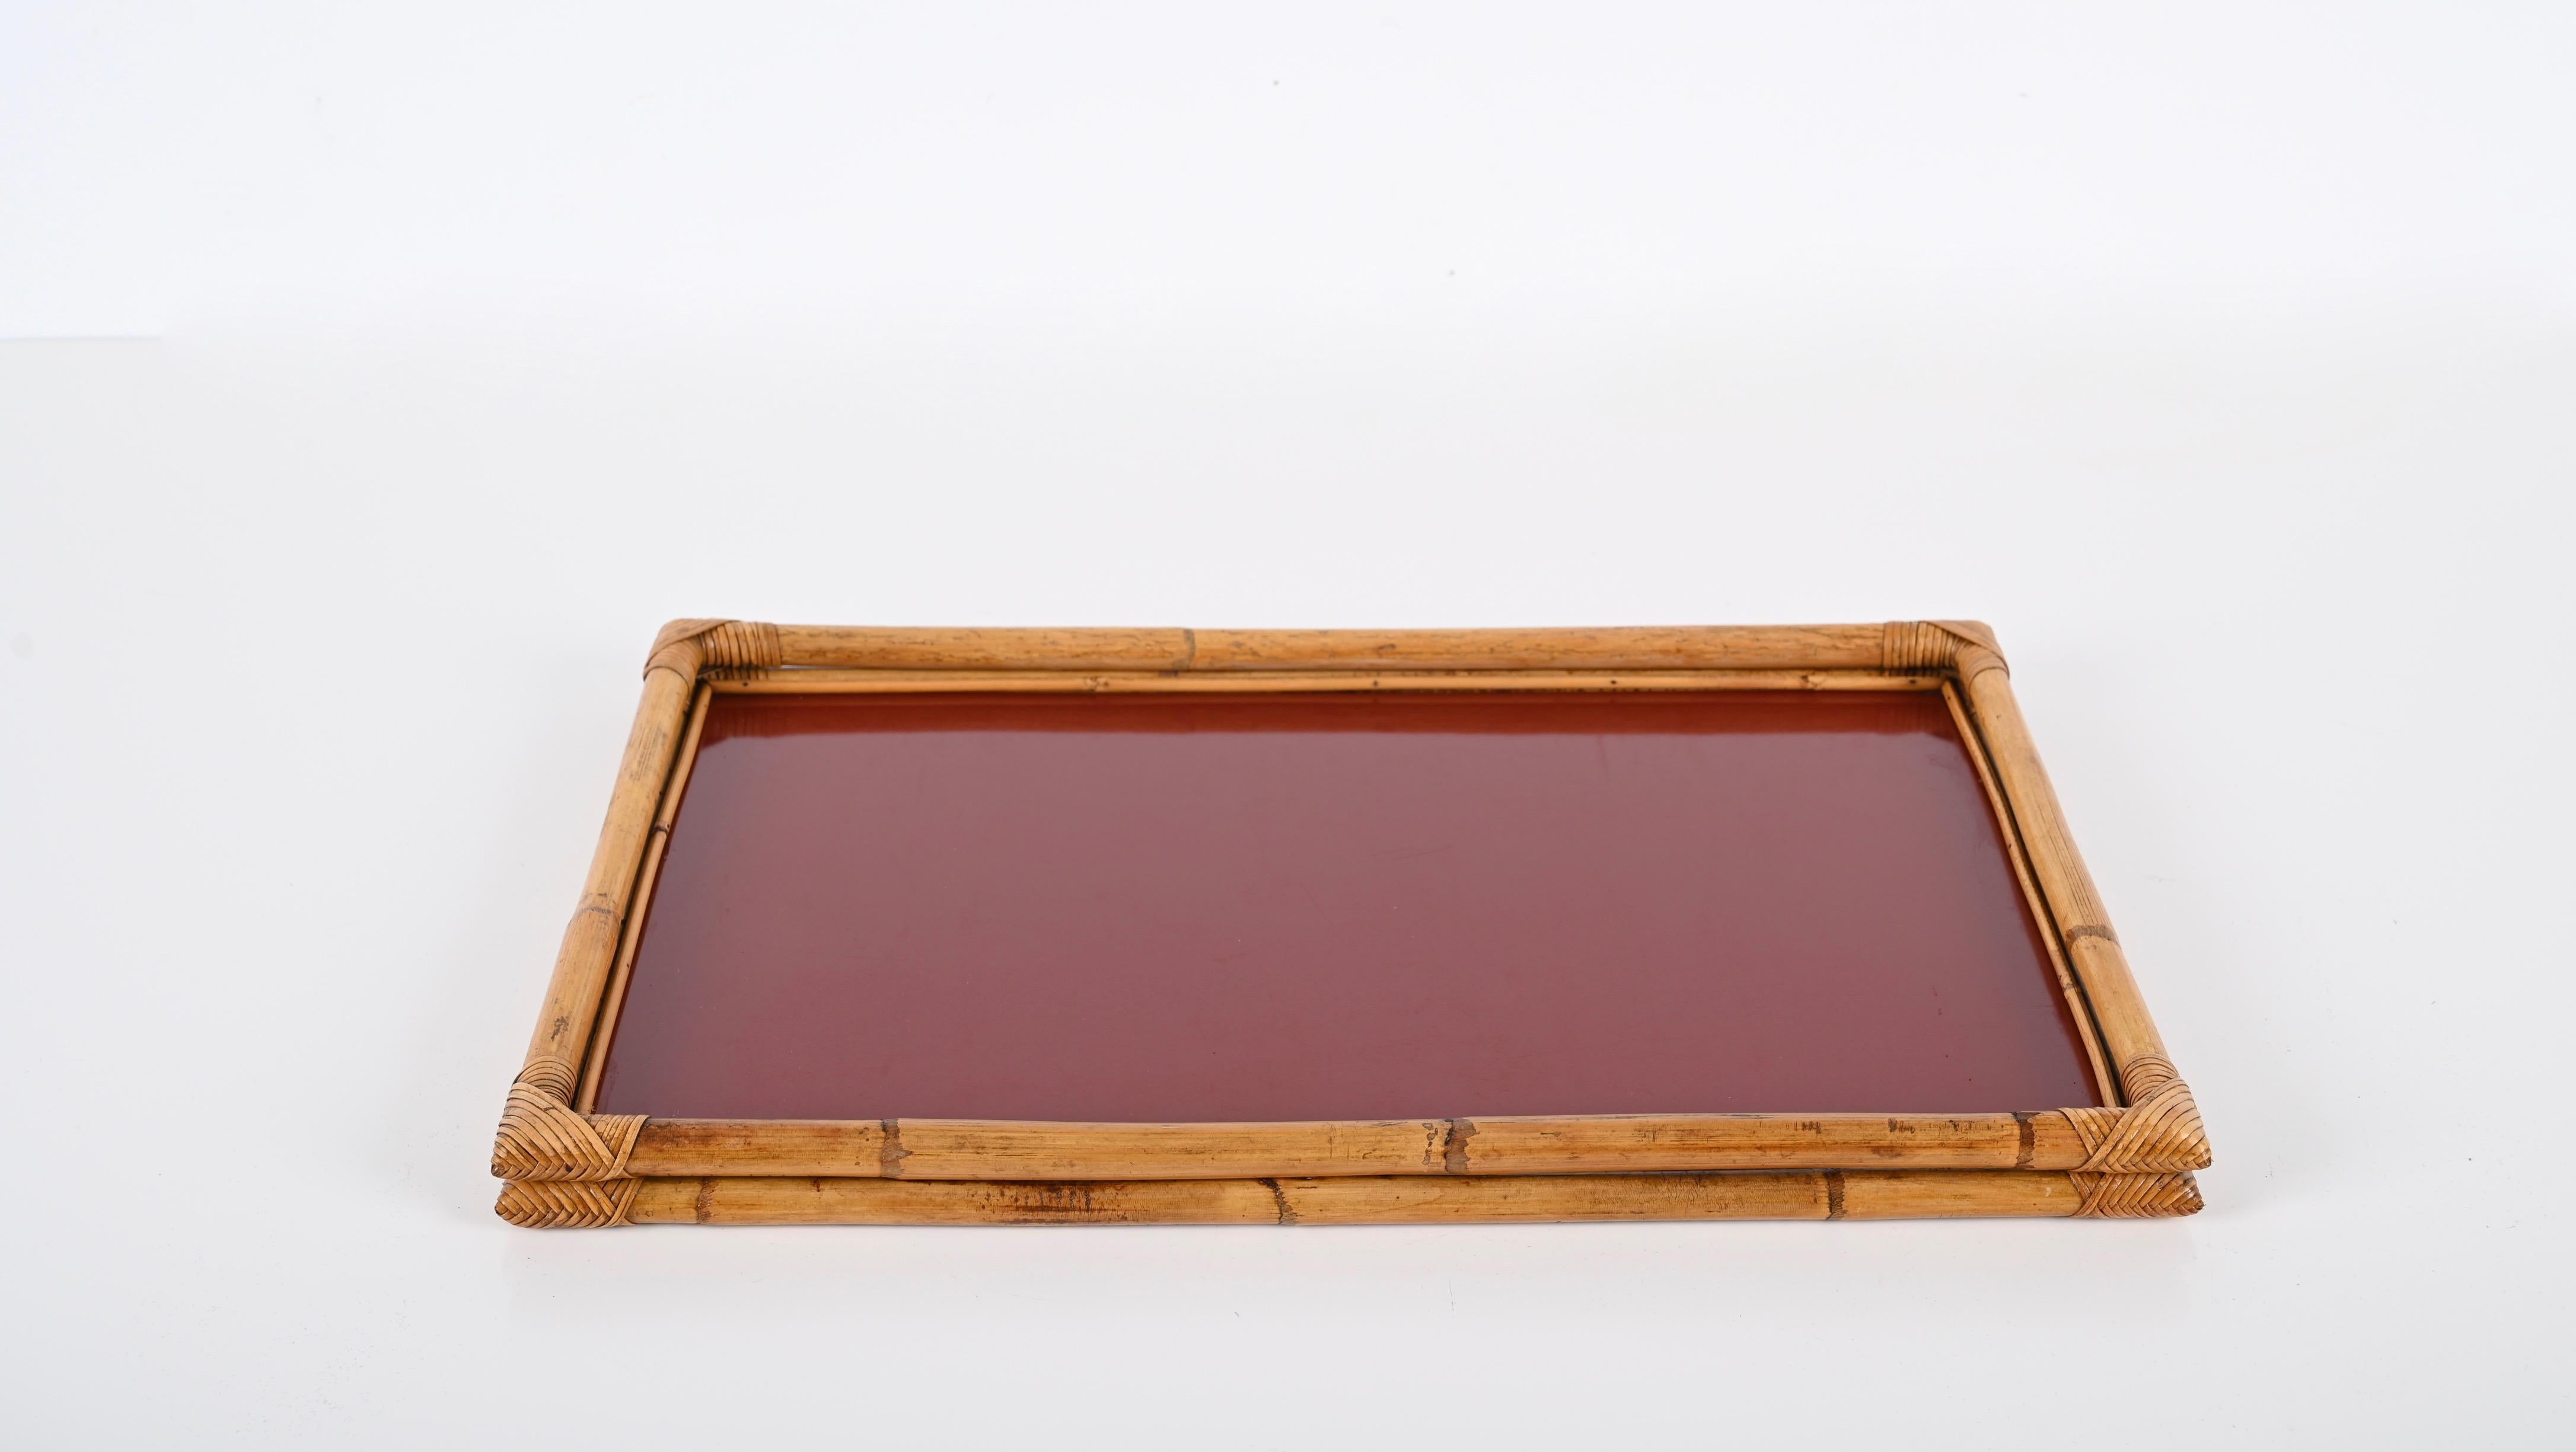 Hand-Woven Bamboo, Rattan and Red Bakelite Serving Tray by Cesare de Cesare, Italy 1970s